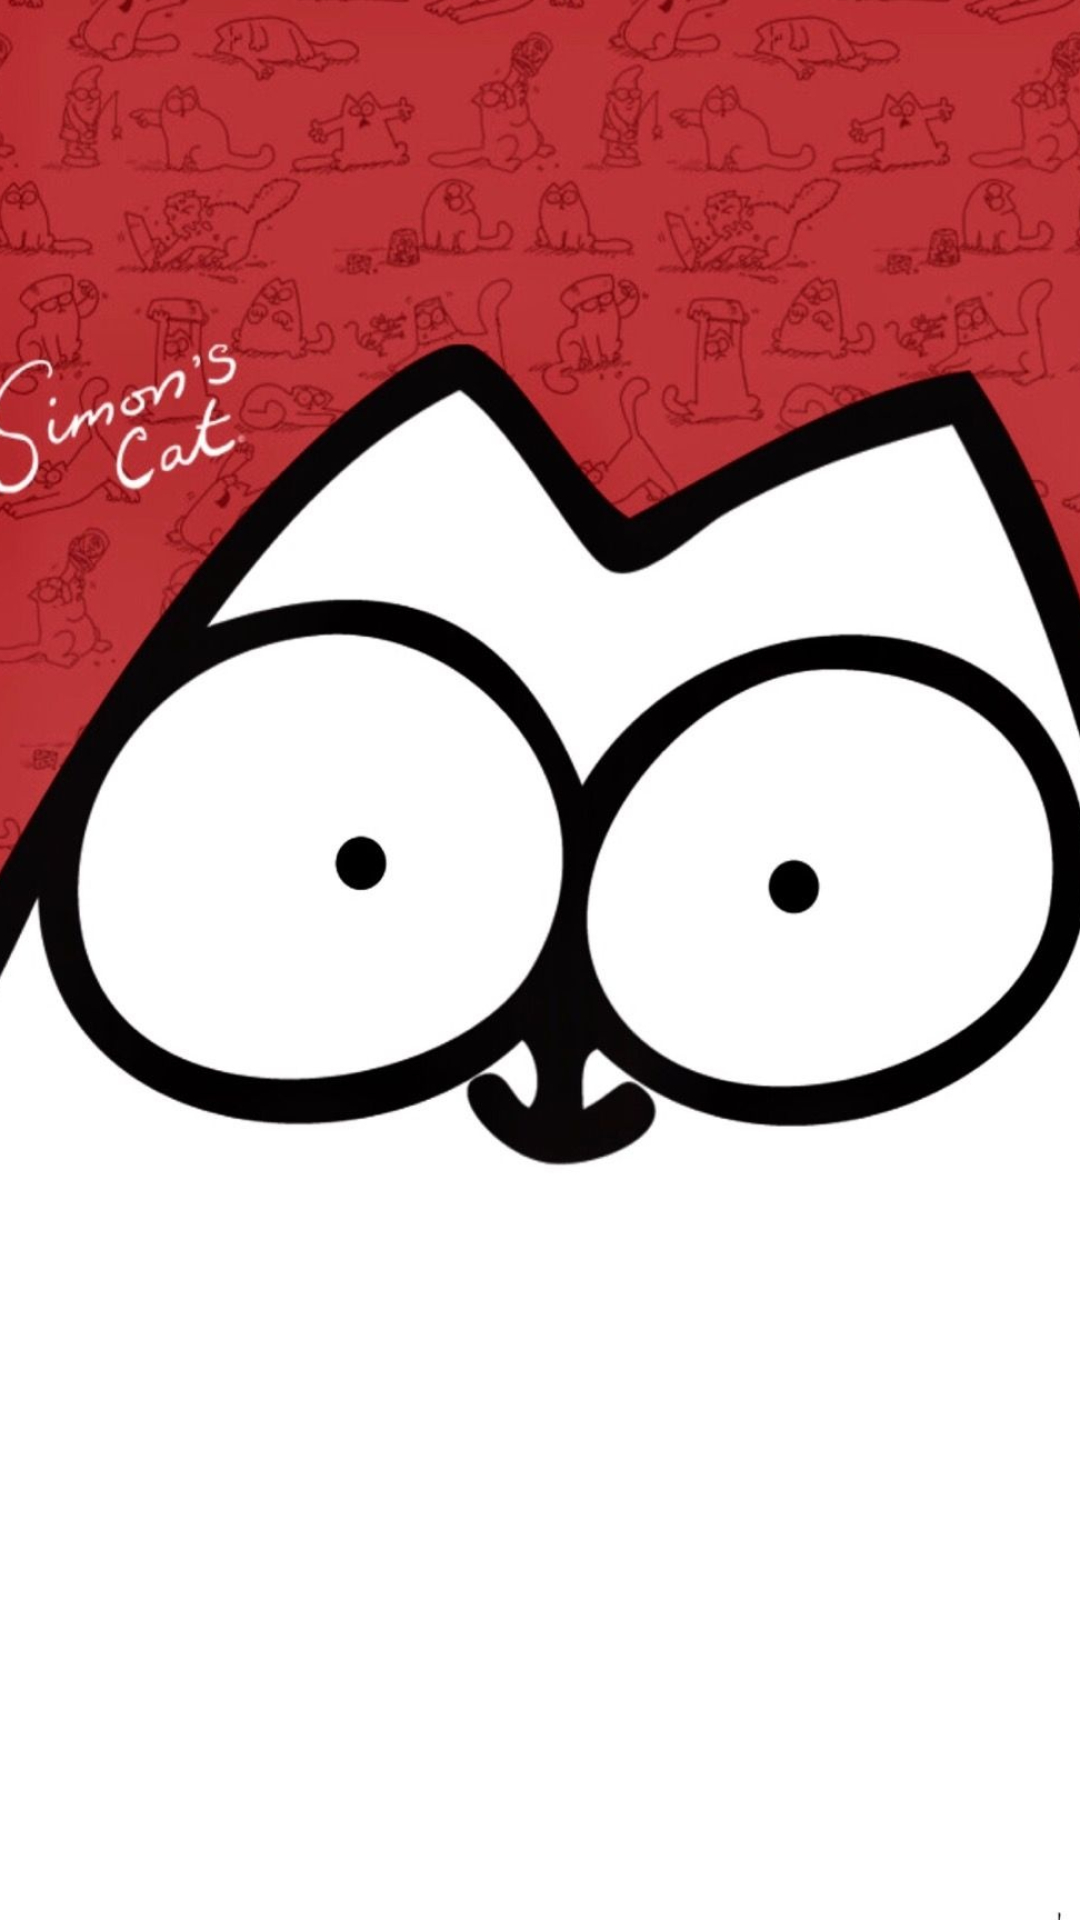 Simon's cat, Wallpapers by Samantha Simpson, Cat lover's delight, 1080x1920 Full HD Phone